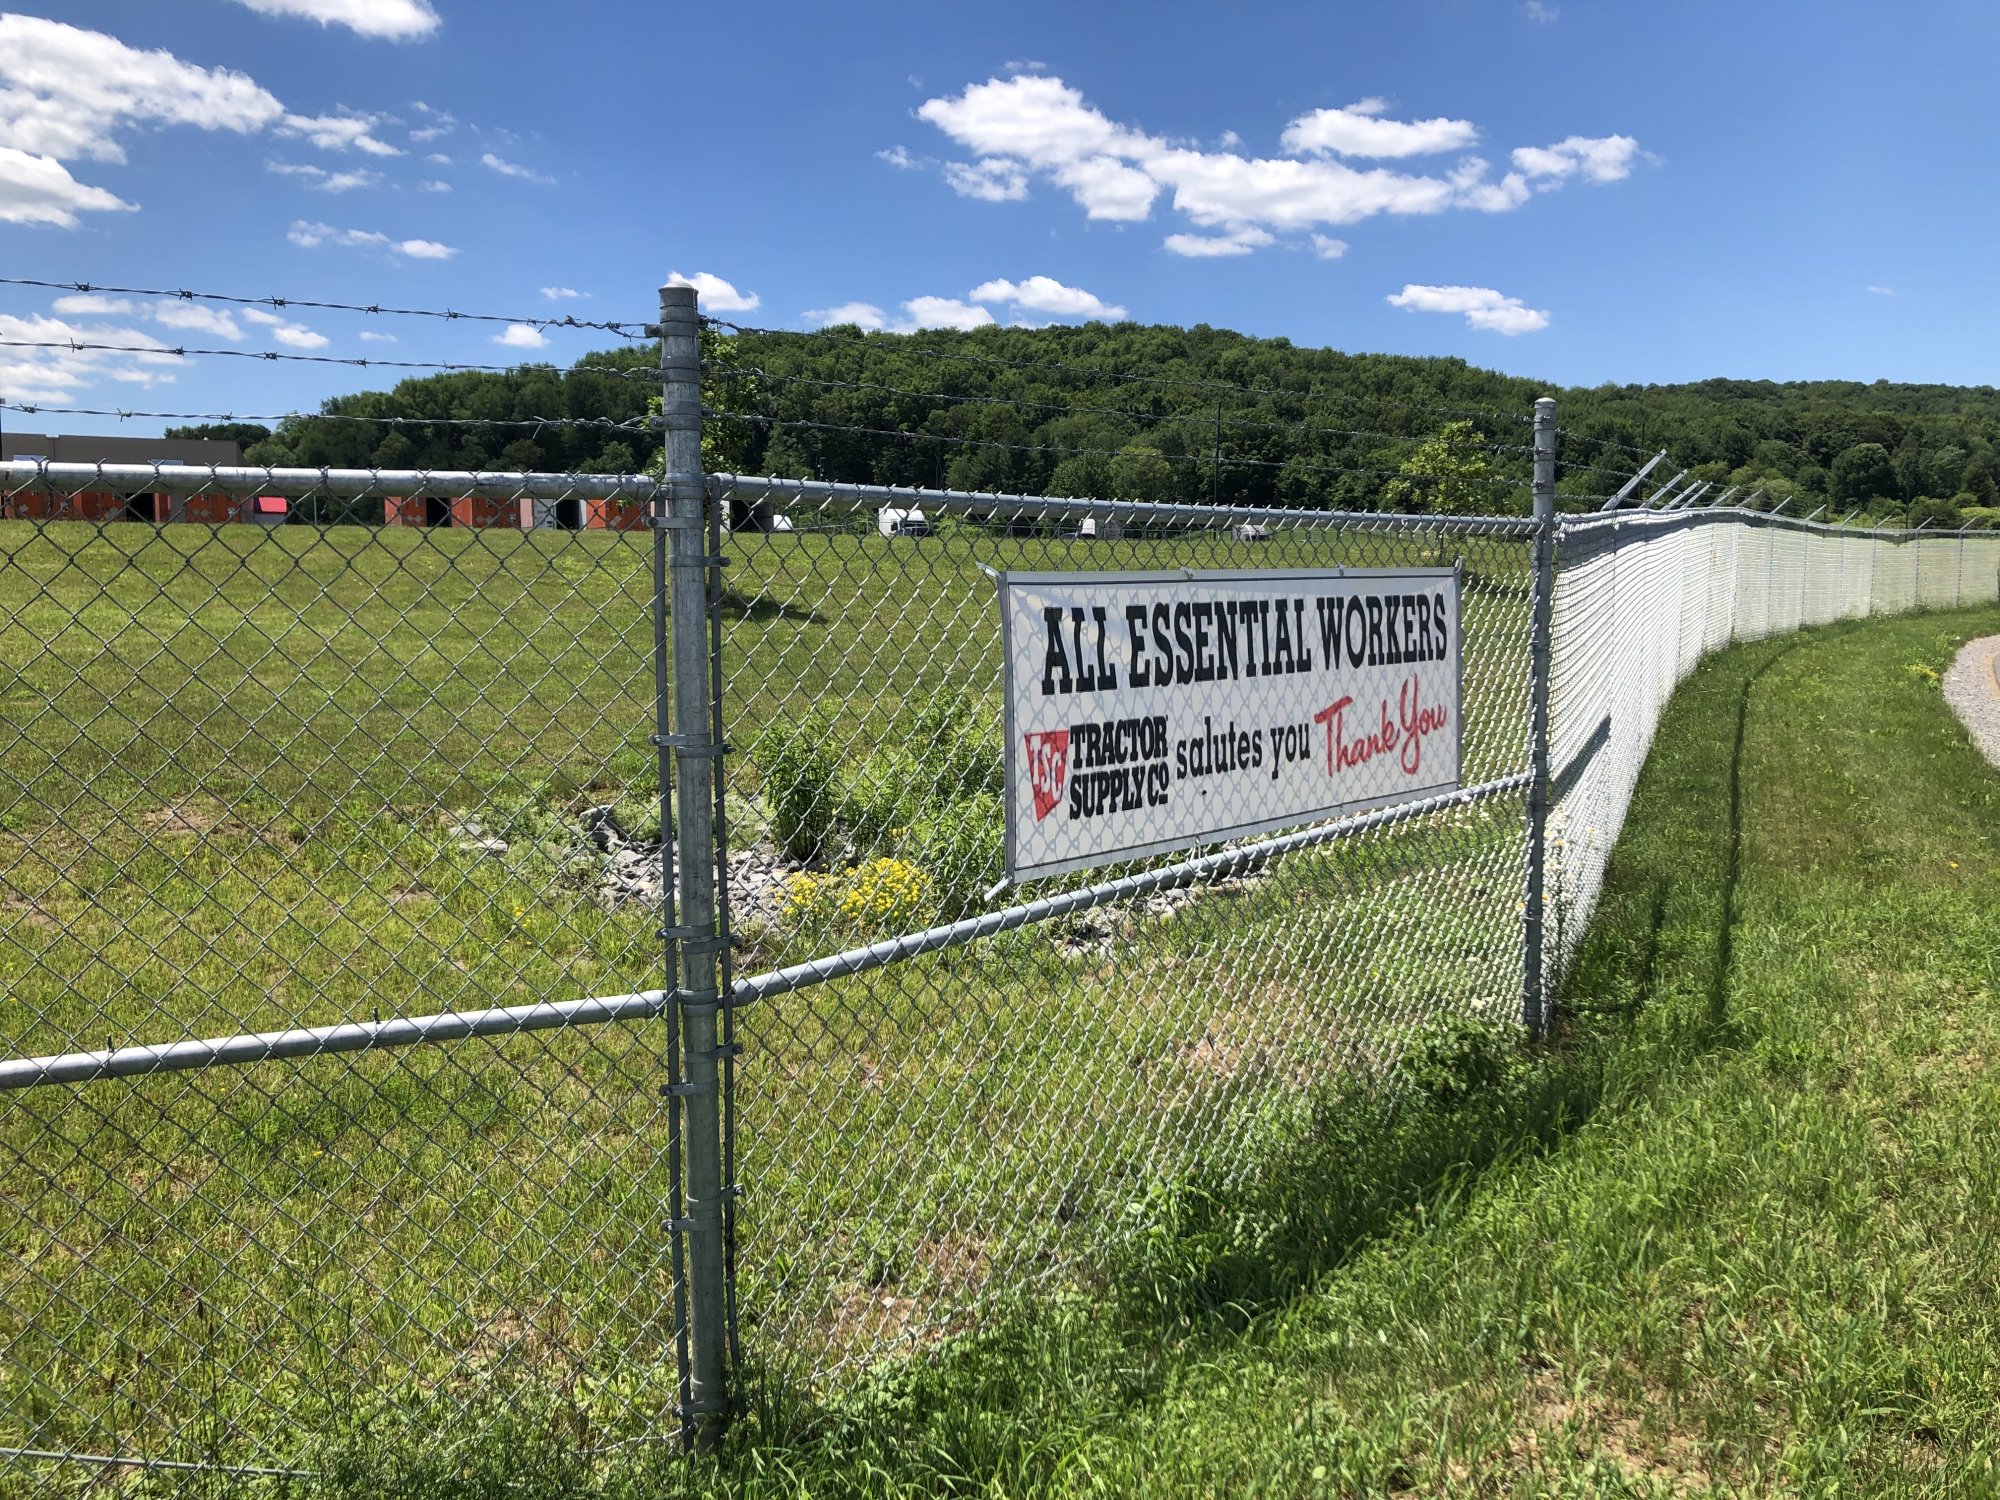 New Hartford New York commercial fencing contractor